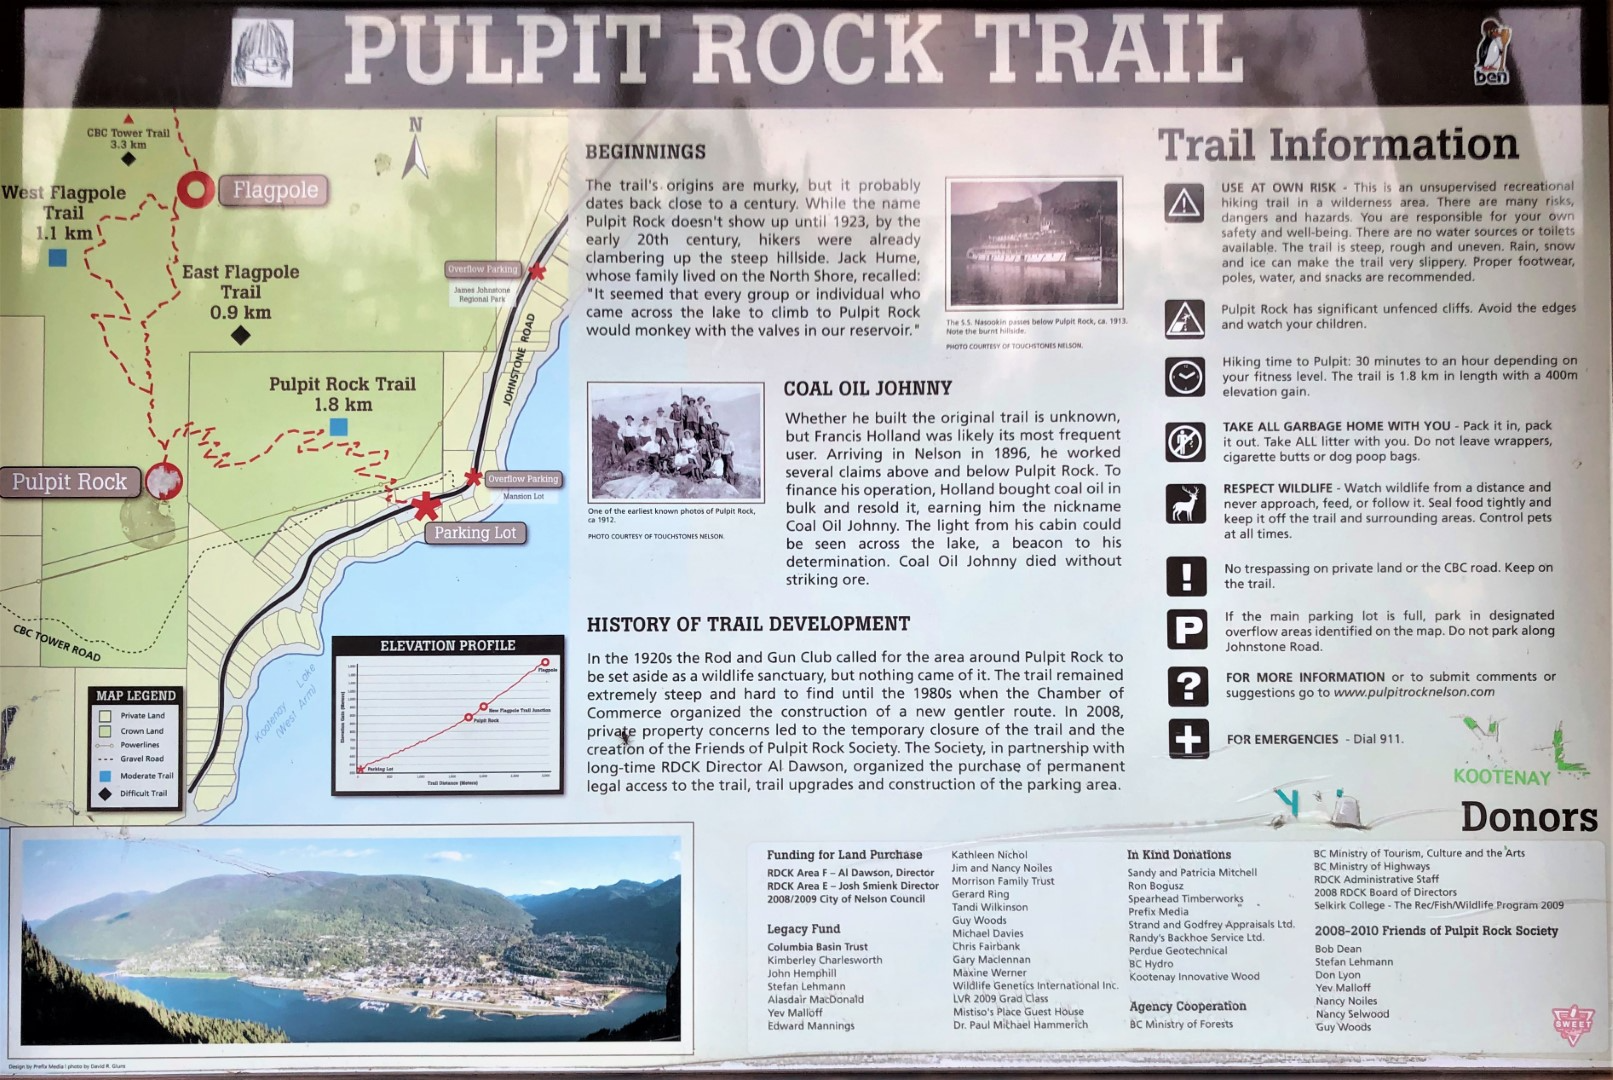 Pulpit Rock information board displayed at the trailhead kiosk